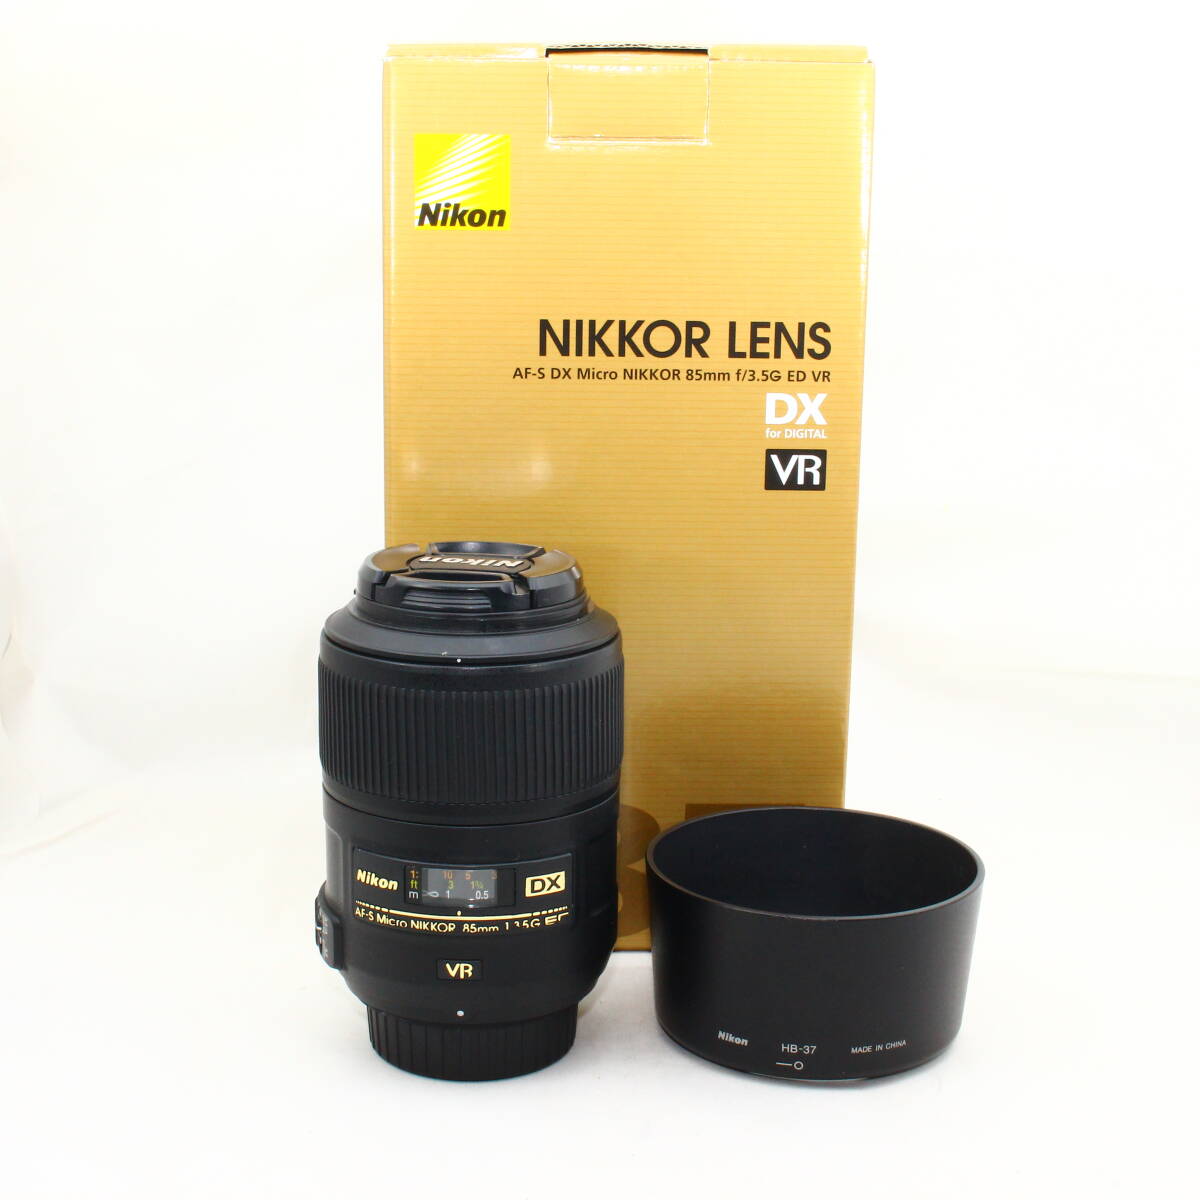 Nikon 単焦点マイクロレンズ AF-S DX Micro NIKKOR 85mm f/3.5G ED VR ニコンDXフォーマット専用 #2402053